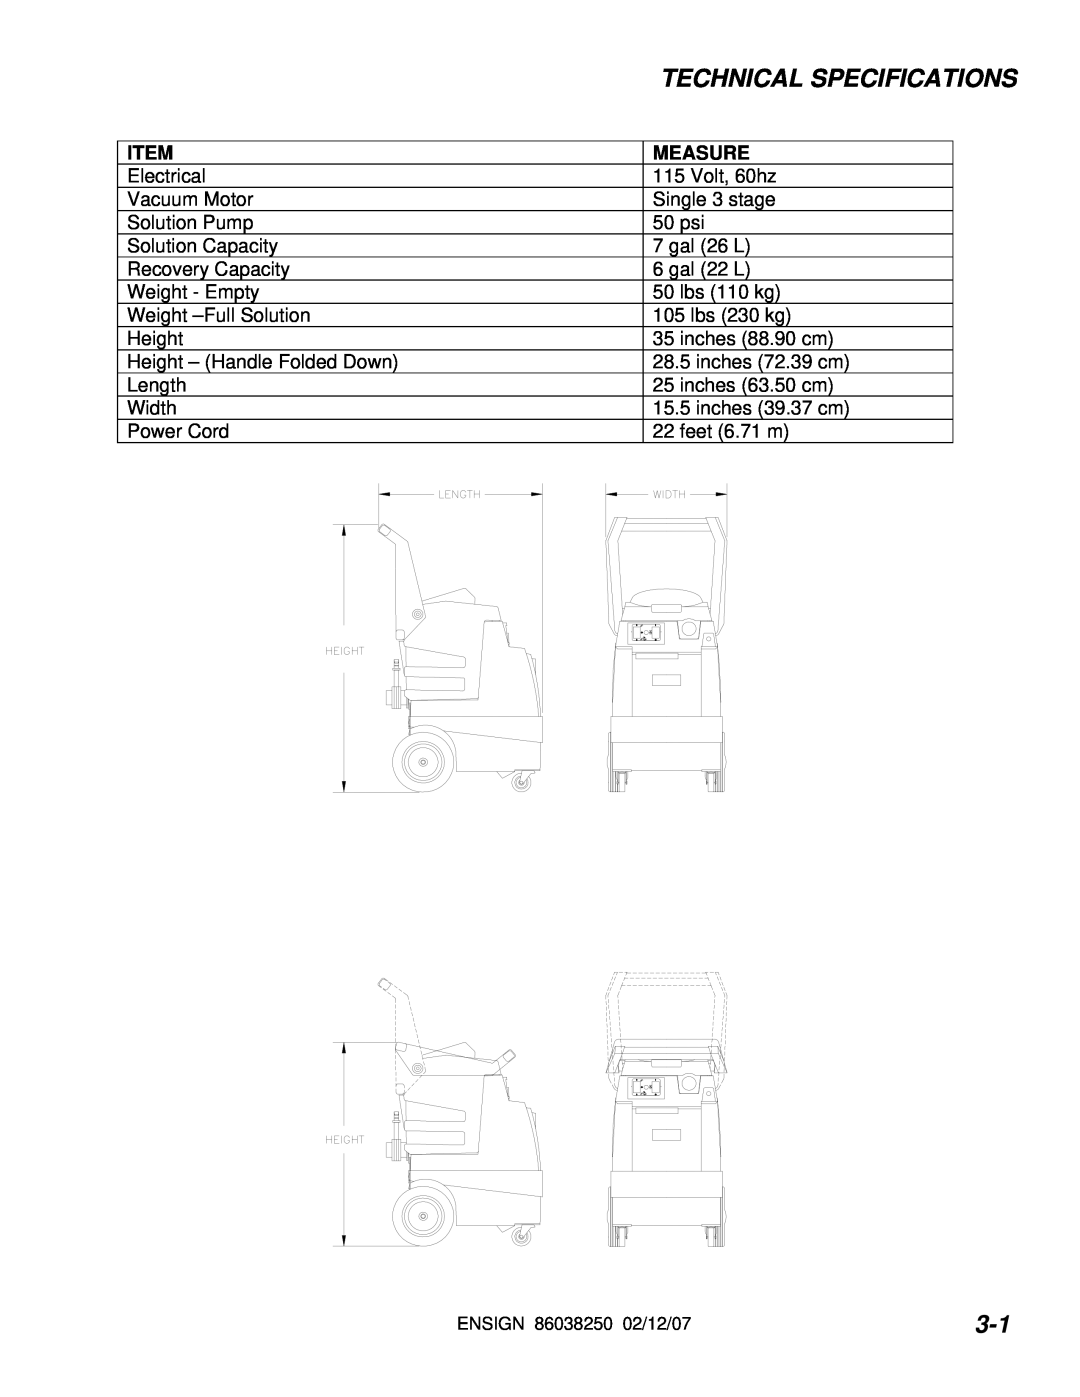 Windsor E50 10070090 operating instructions Technical Specifications, Measure 